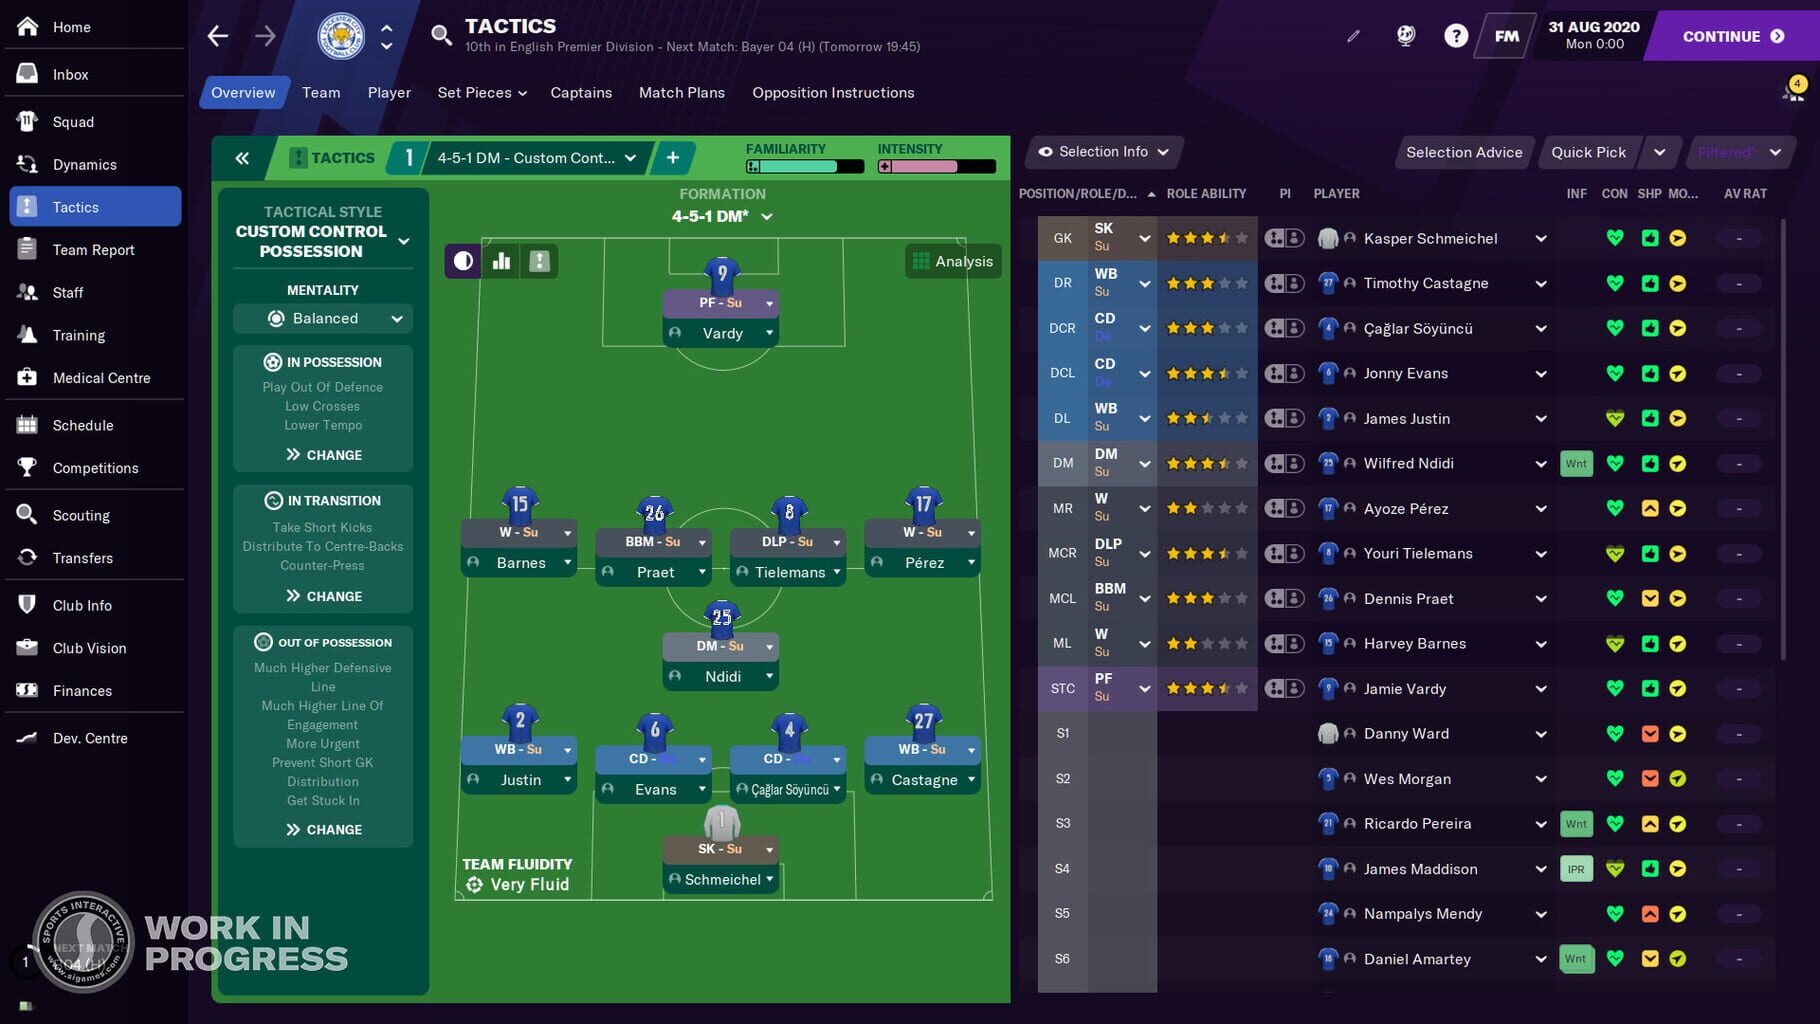 football manager 2021 activation key